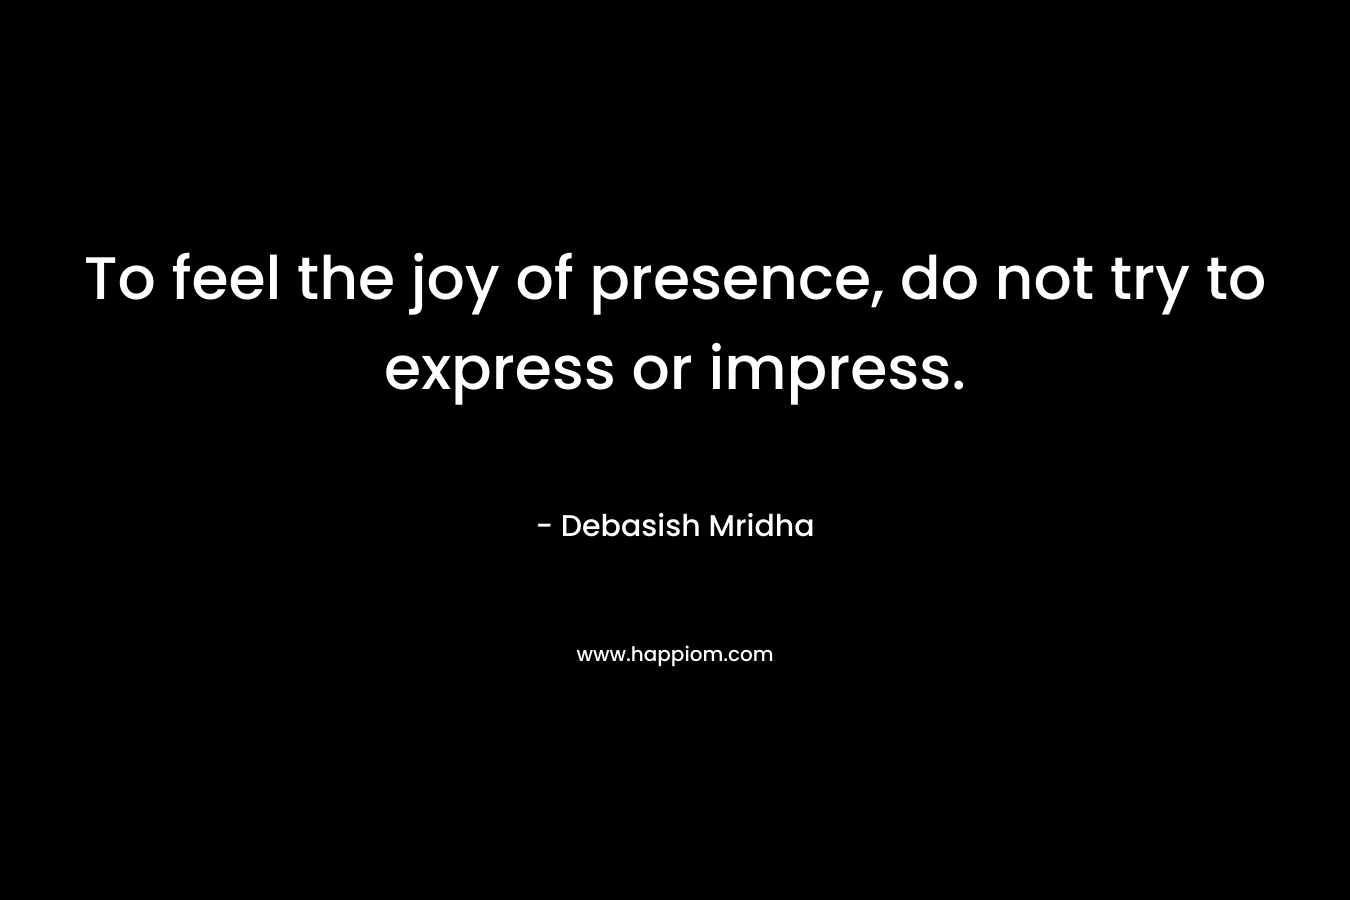 To feel the joy of presence, do not try to express or impress.